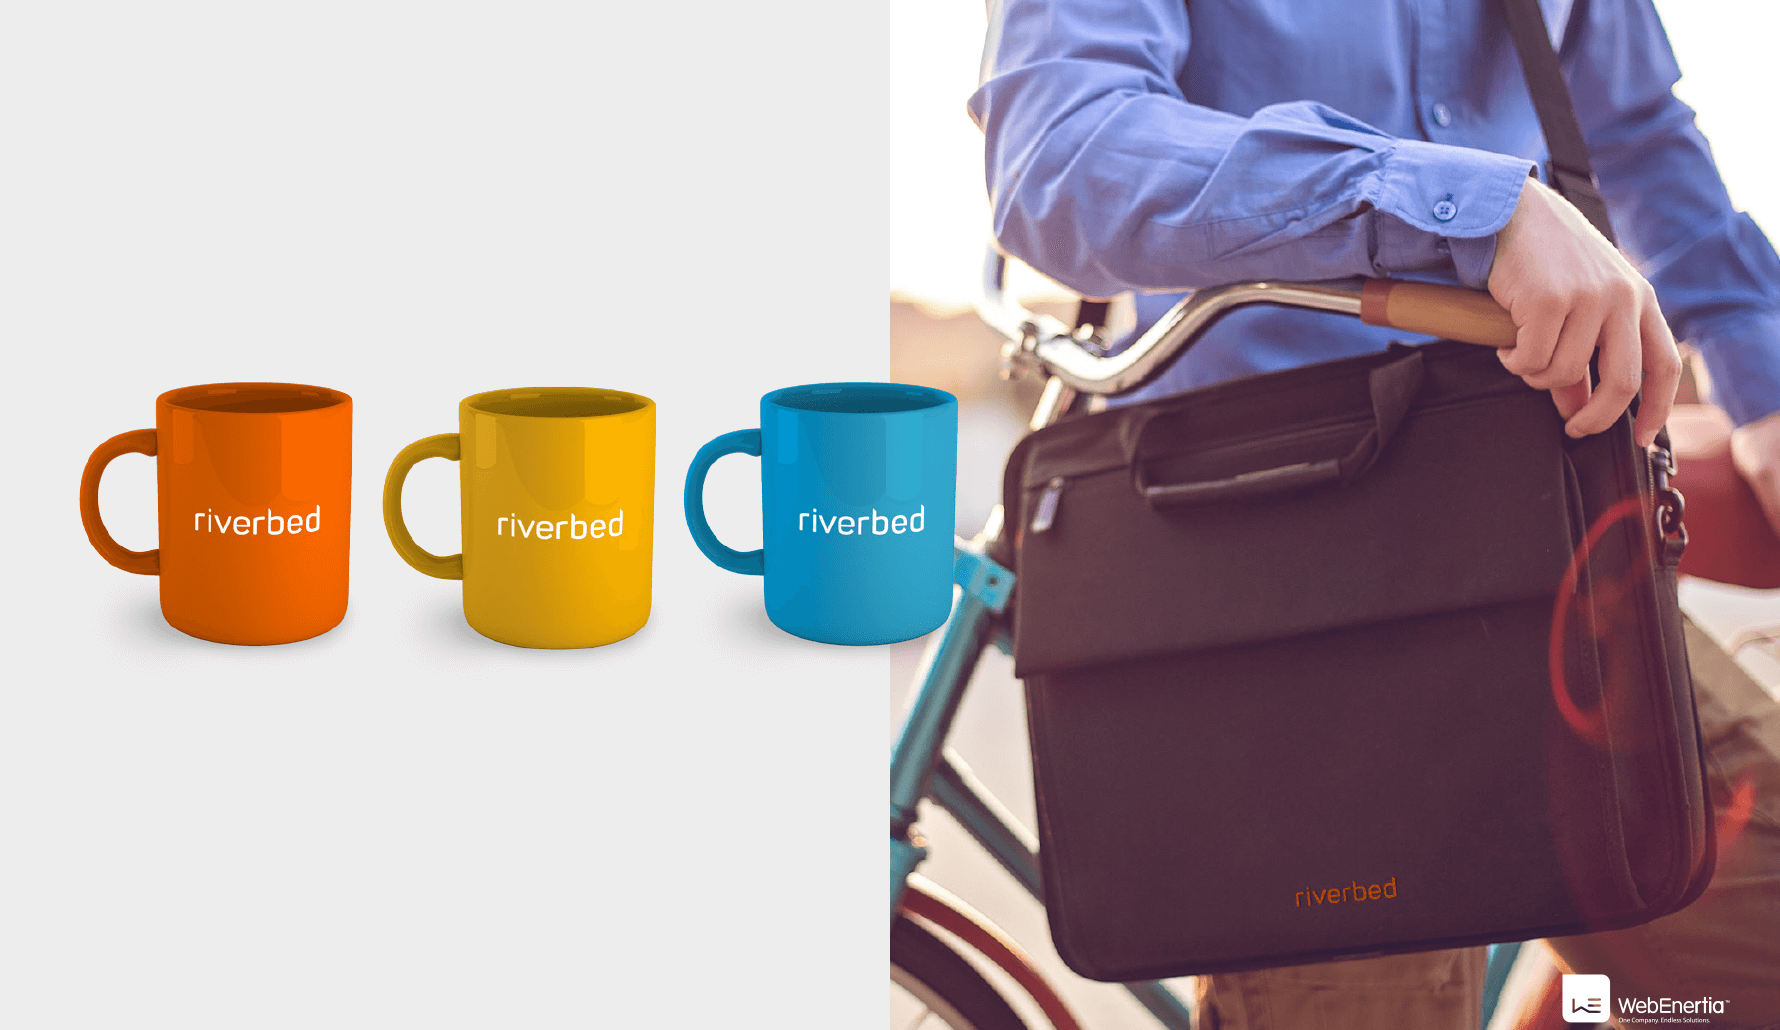 Riverbed Logo Redesign coffee mugs and laptop bag